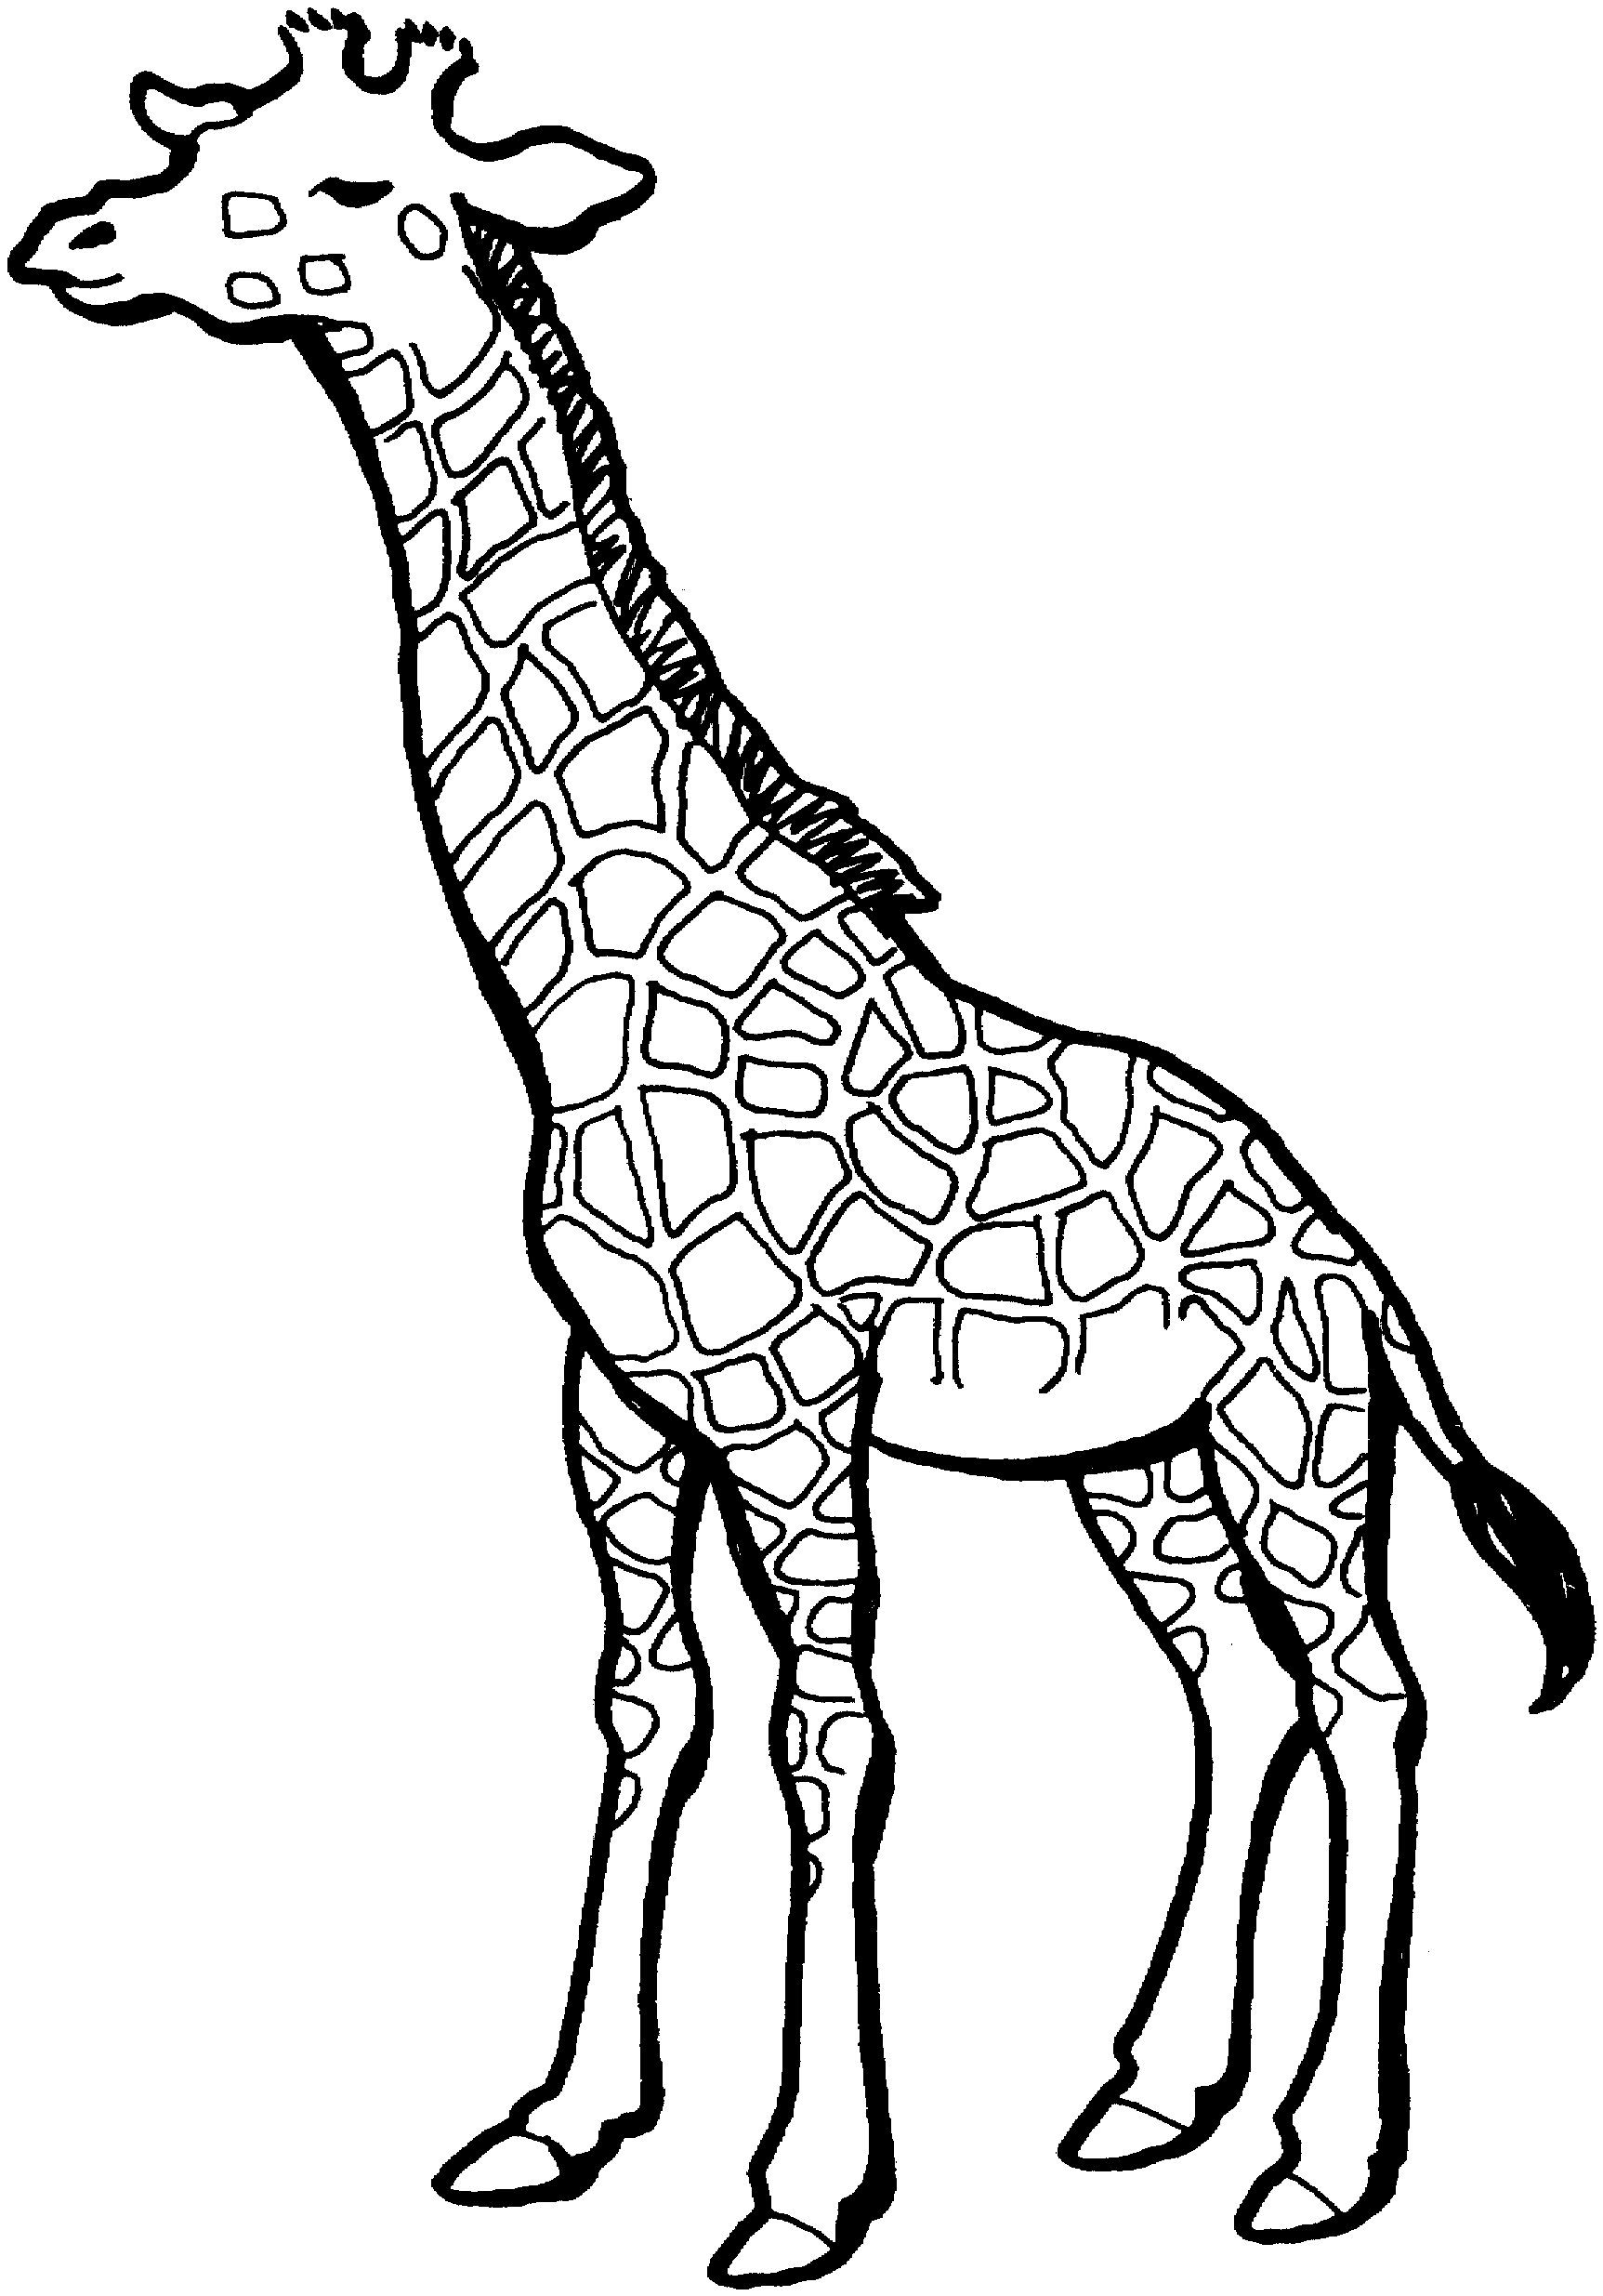 Giraffe drawings for kids |coloring pages for adults, coloring ...